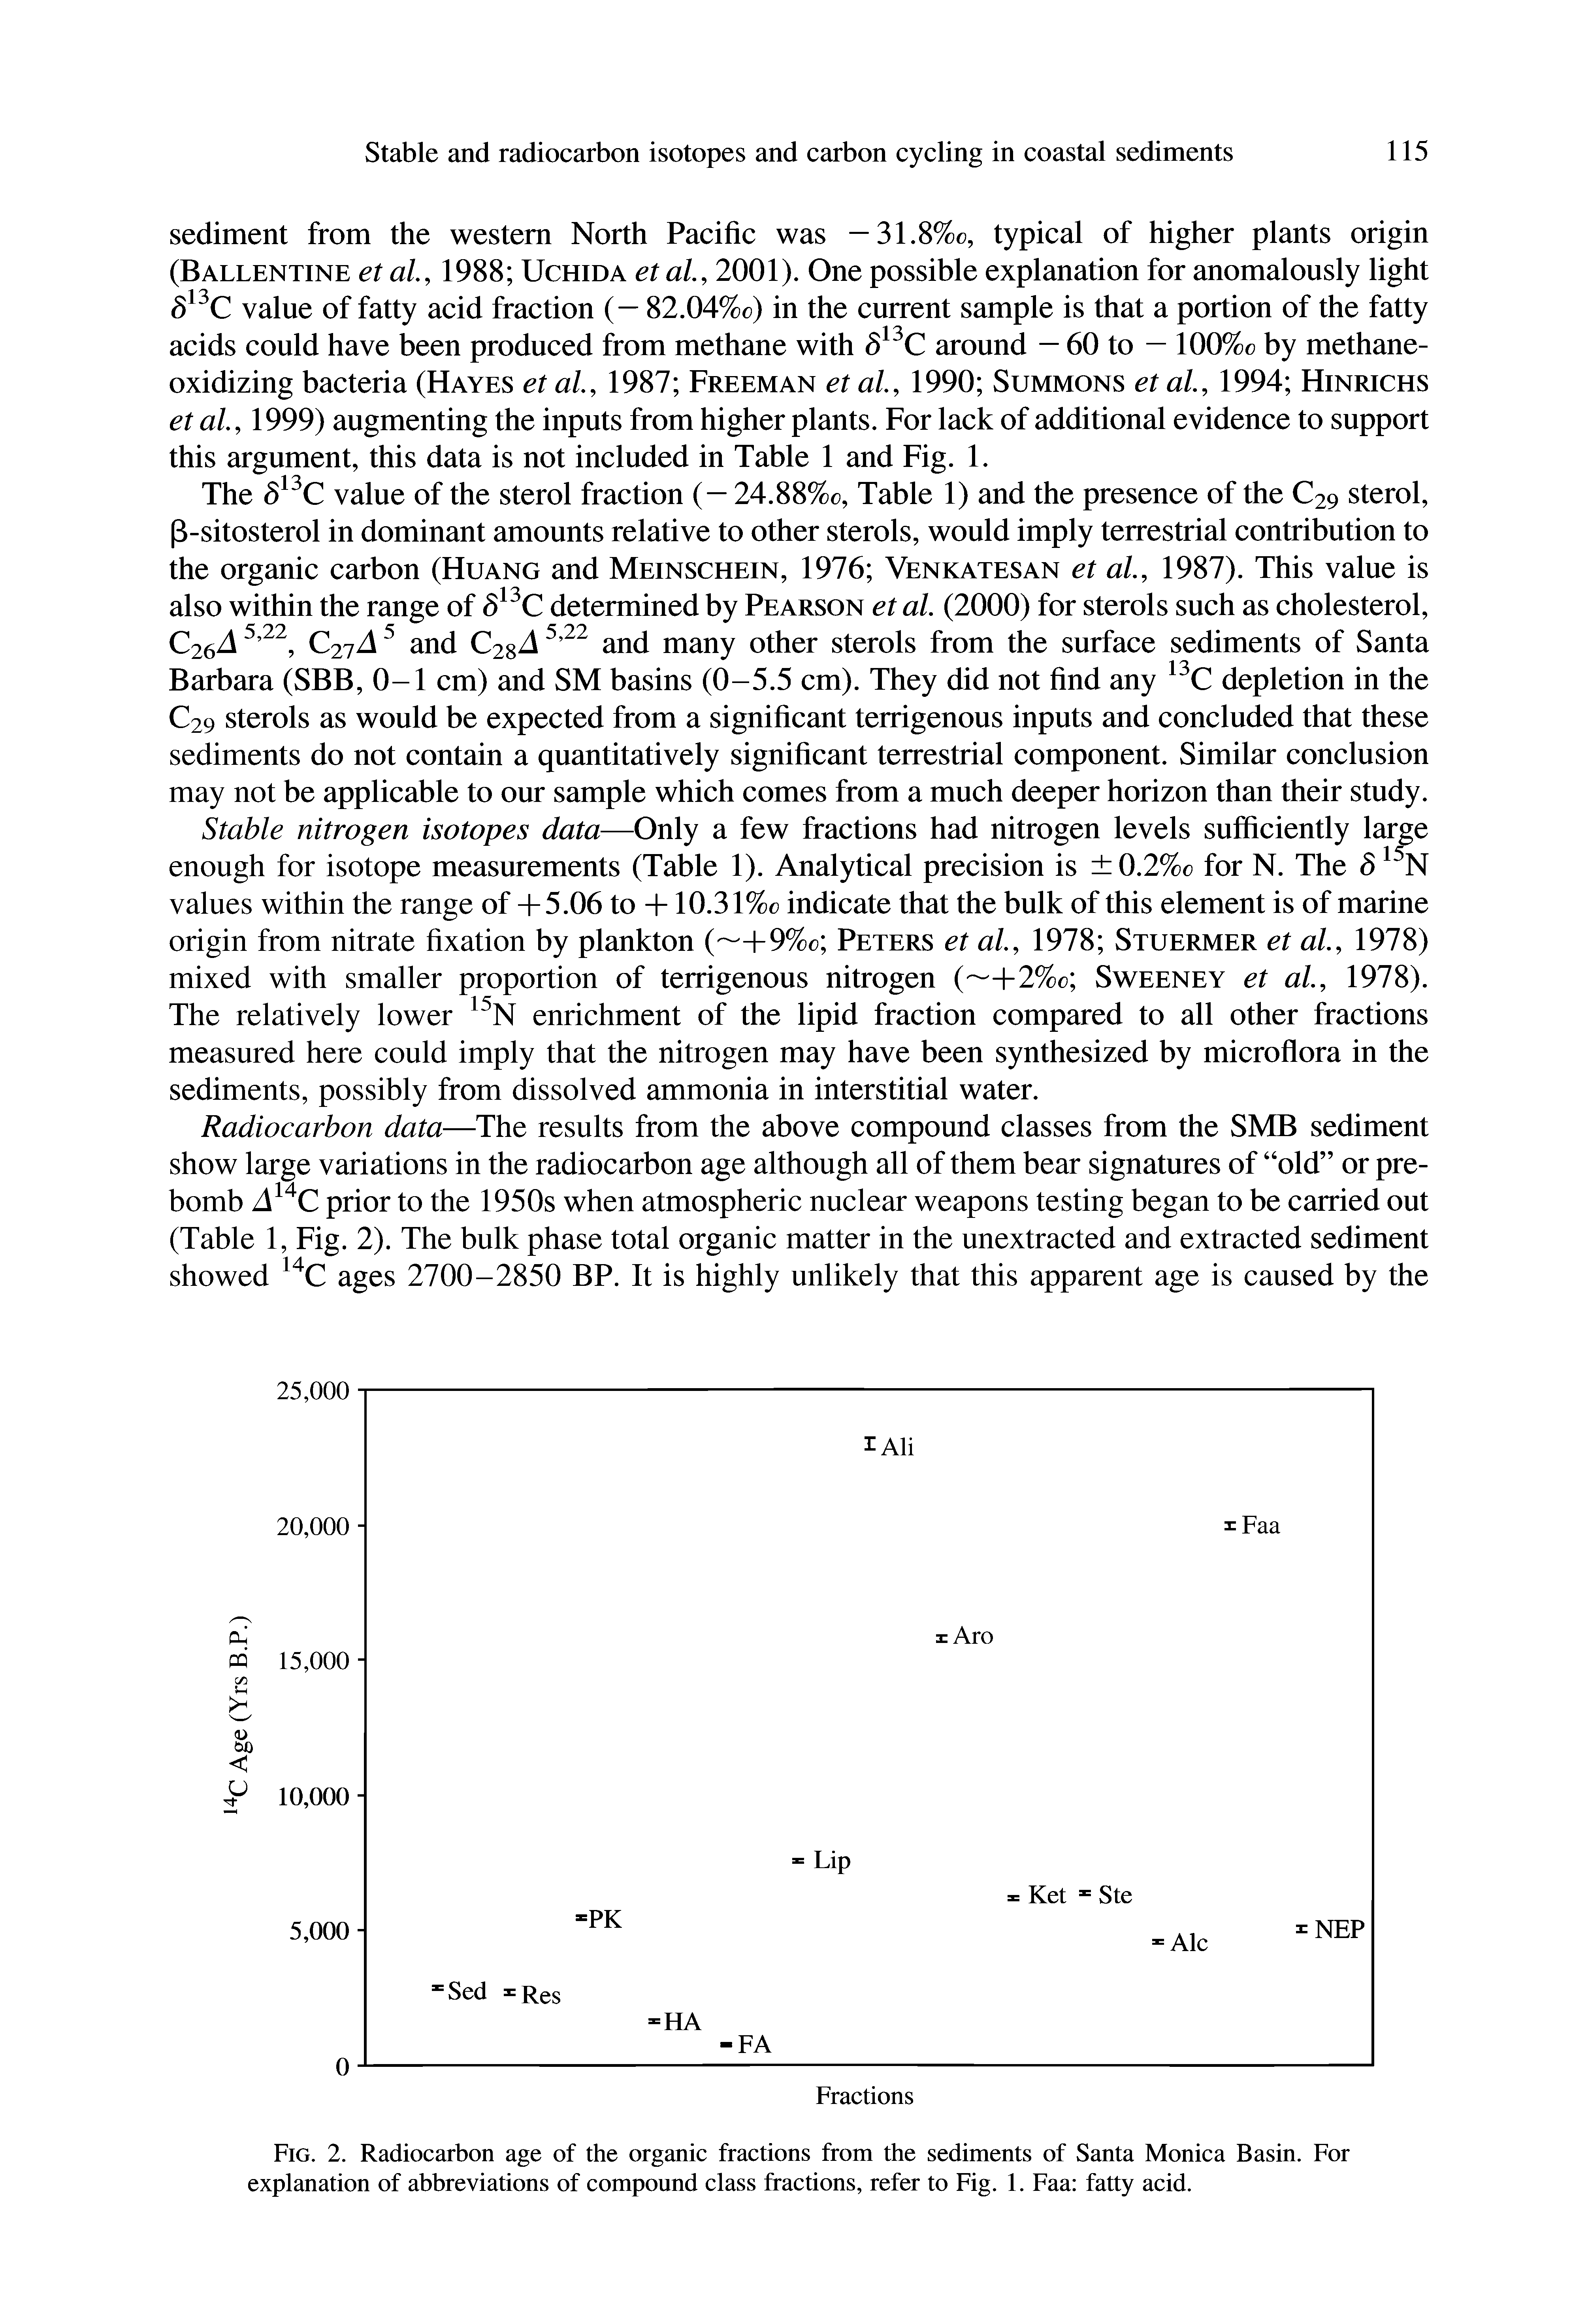 Fig. 2. Radiocarbon age of the organic fractions from the sediments of Santa Monica Basin. For explanation of abbreviations of compound class fractions, refer to Fig. 1. Faa fatty acid.